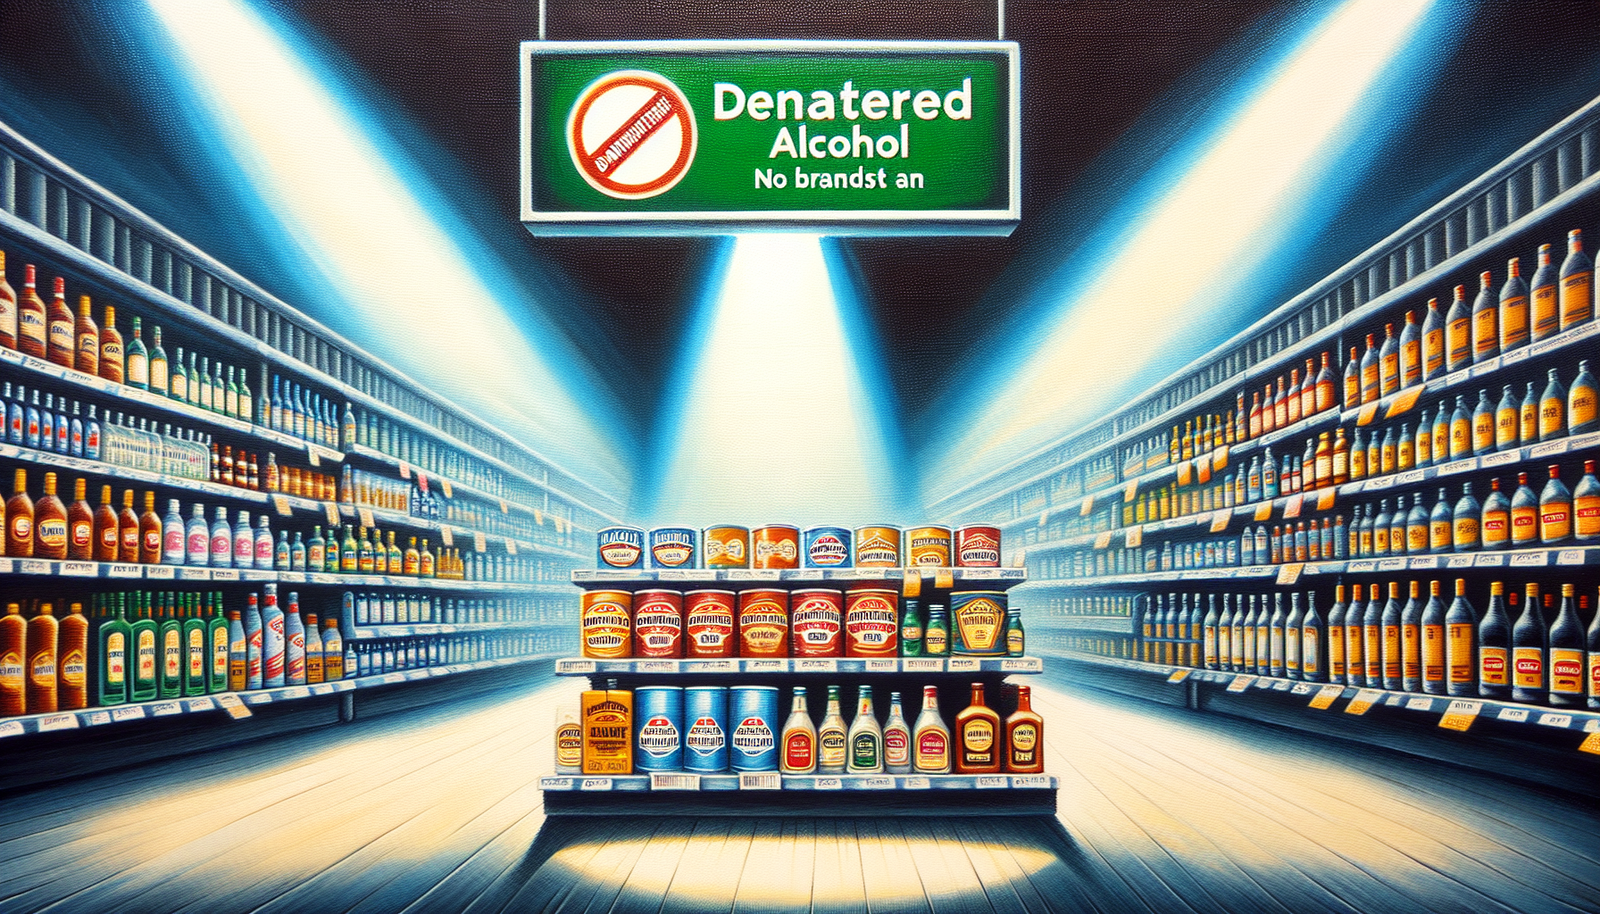 Where To Buy Denatured Alcohol